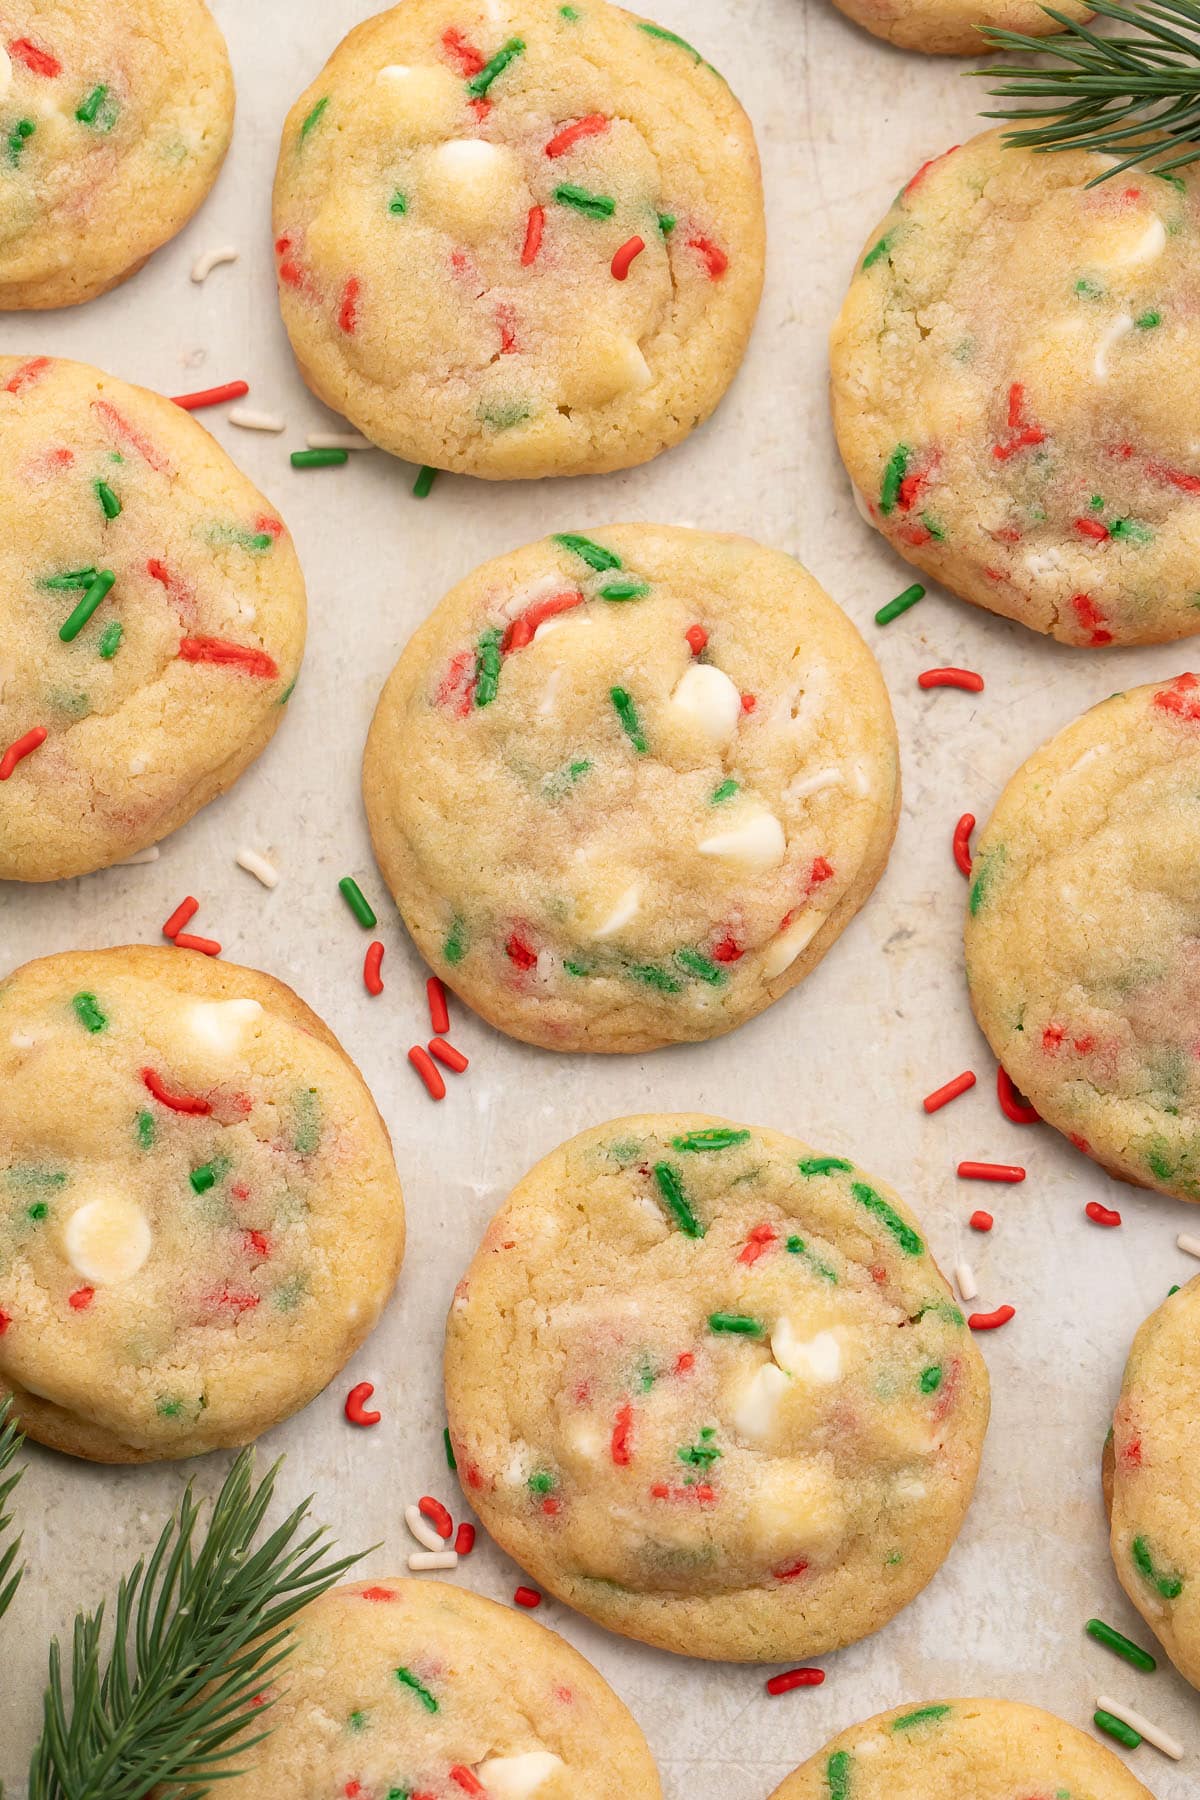 Rows of Christmas confetti cookies with red, white, and green sprinkles on parchment paper, with sprigs of rosemary resembling Christmas tree branches at the corners of the image.